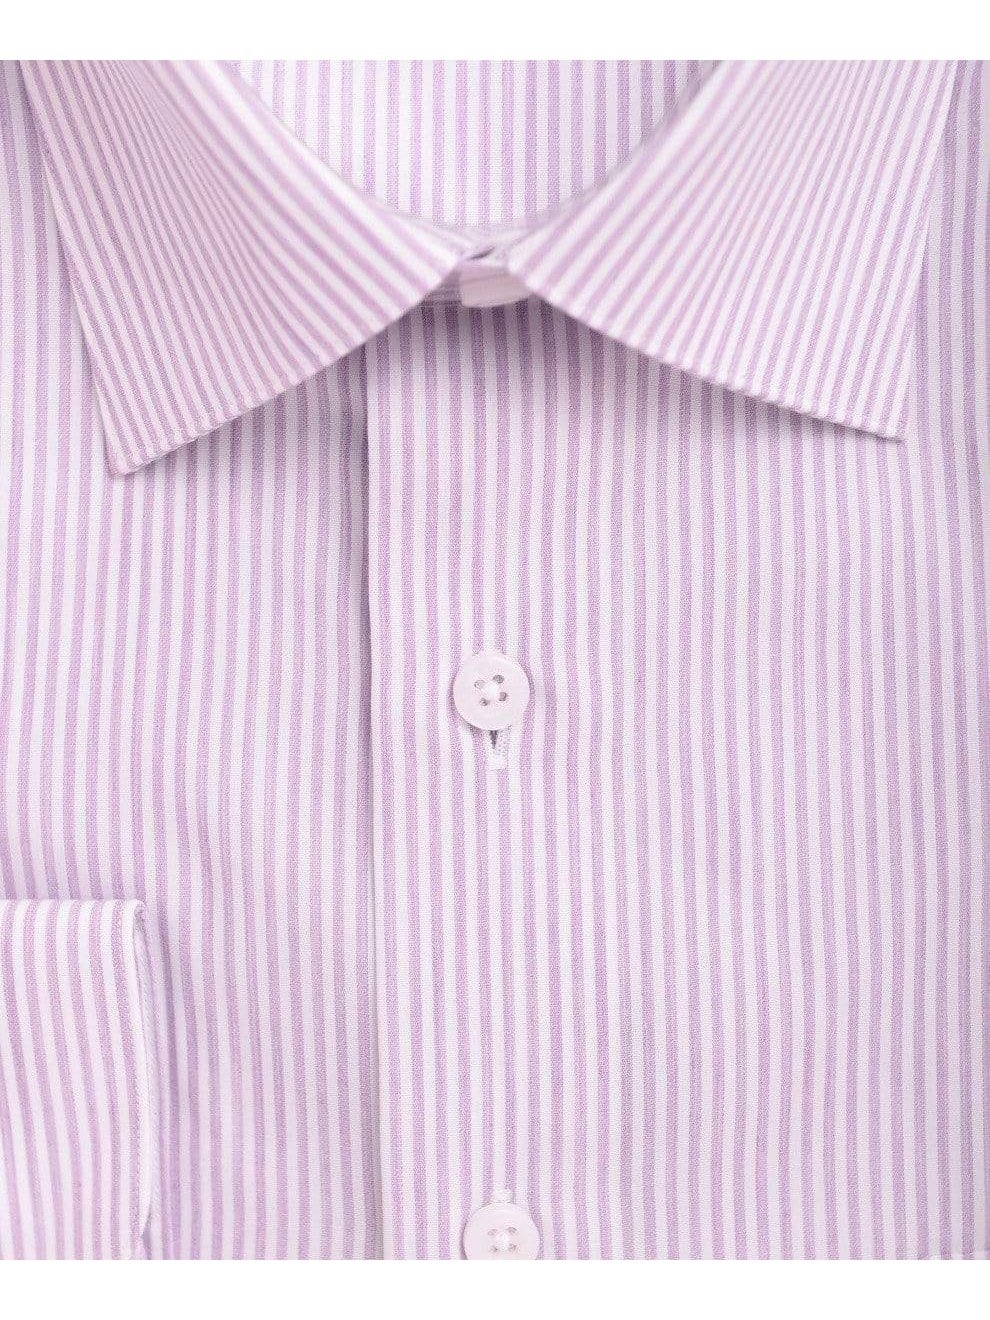 Proper Shirtings SHIRTS Mens Classic Fit Purple Striped Spread Collar Easy Care Cotton Dress Shirt